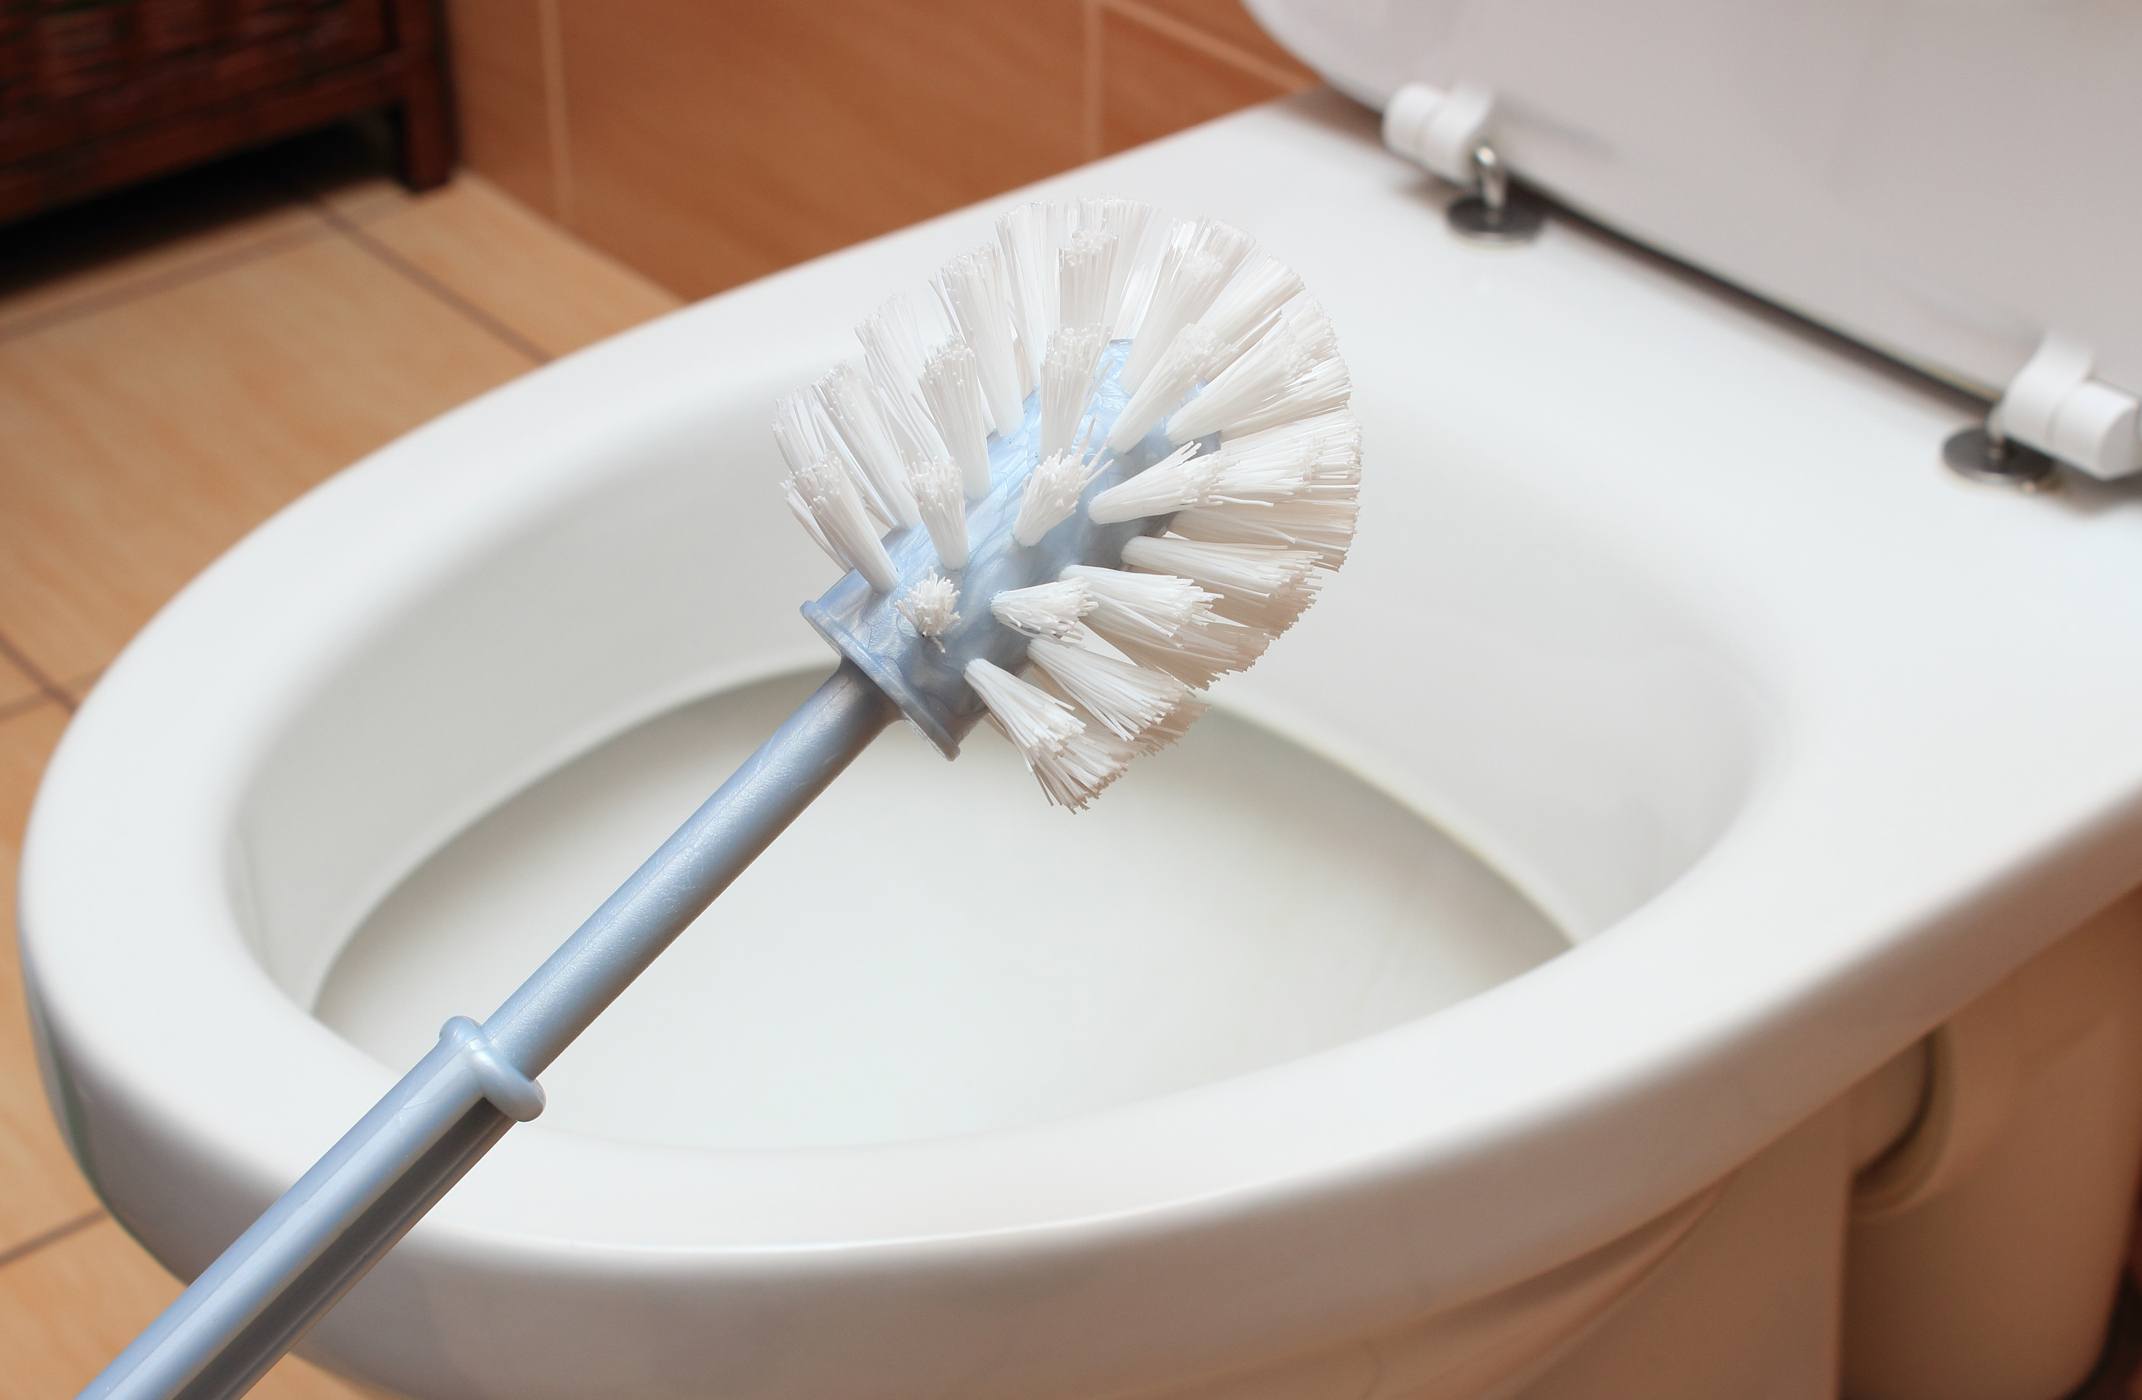 Toilet brush cleaning